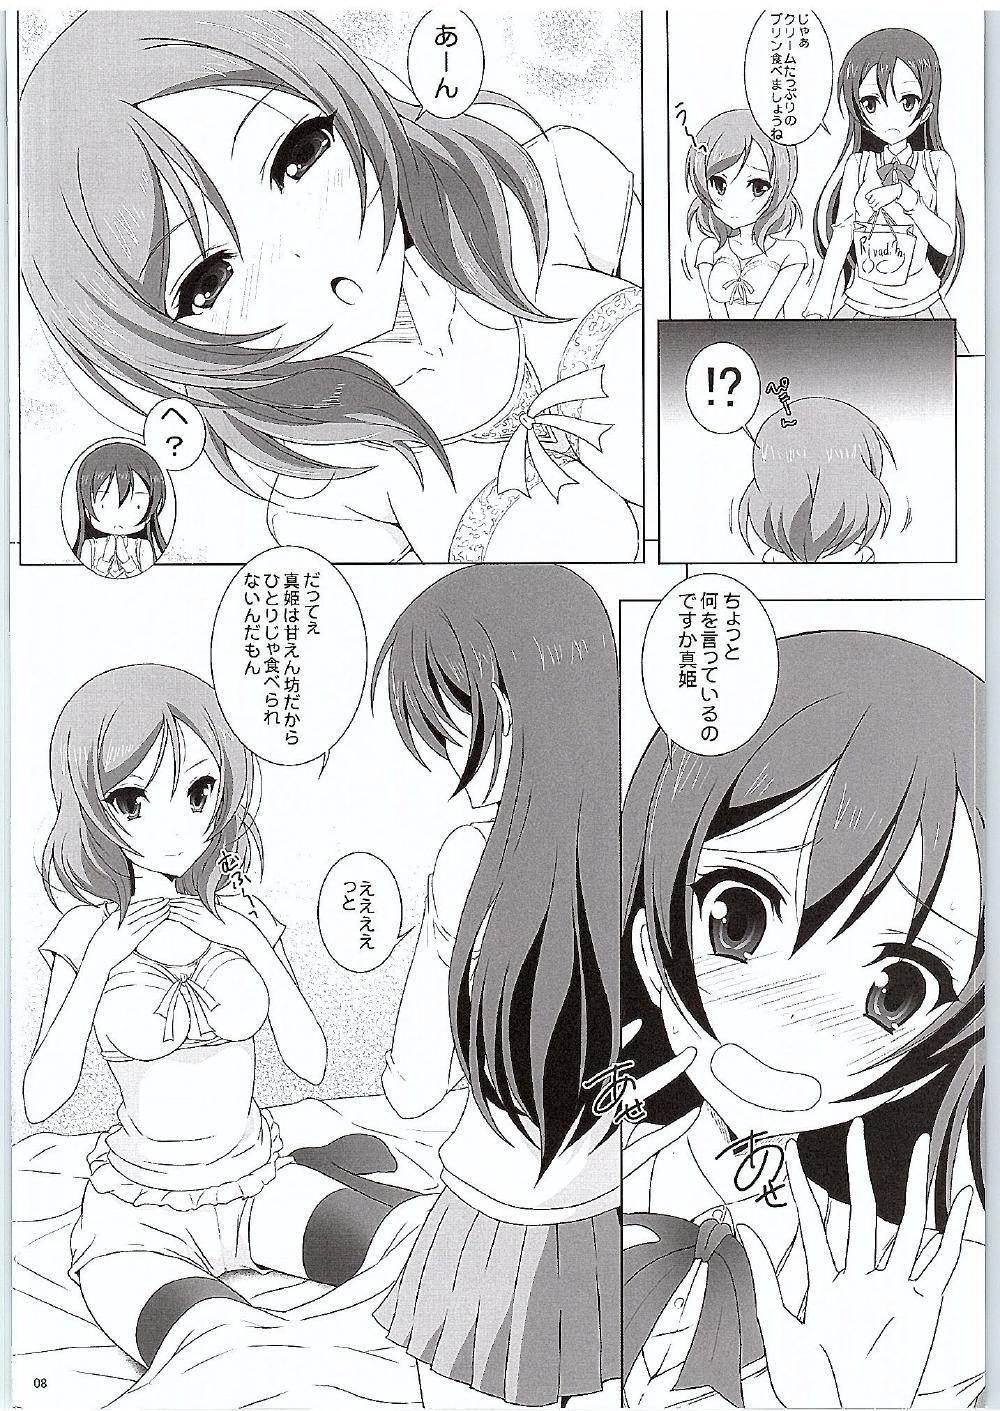 Hidden UmiMaki Roll - Love live White Girl - Page 7